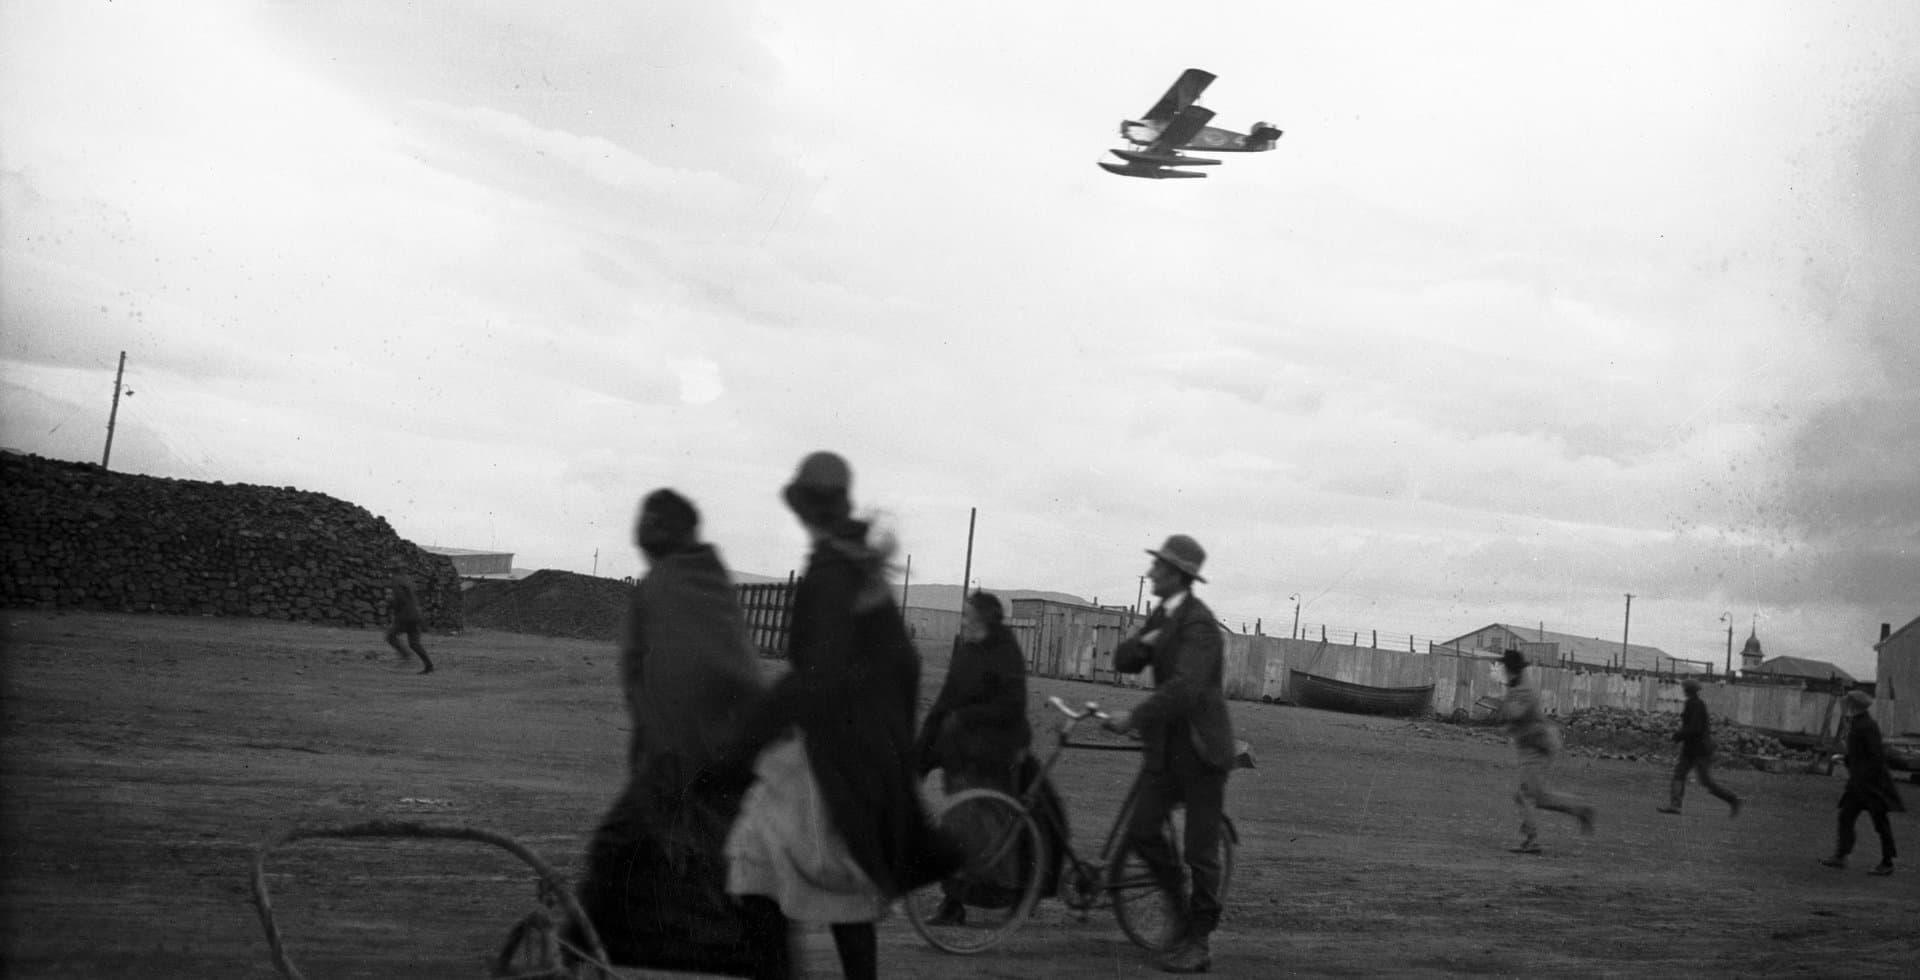 Lecture in Icelandic: The first aerial circumnavigation of the world in 1924